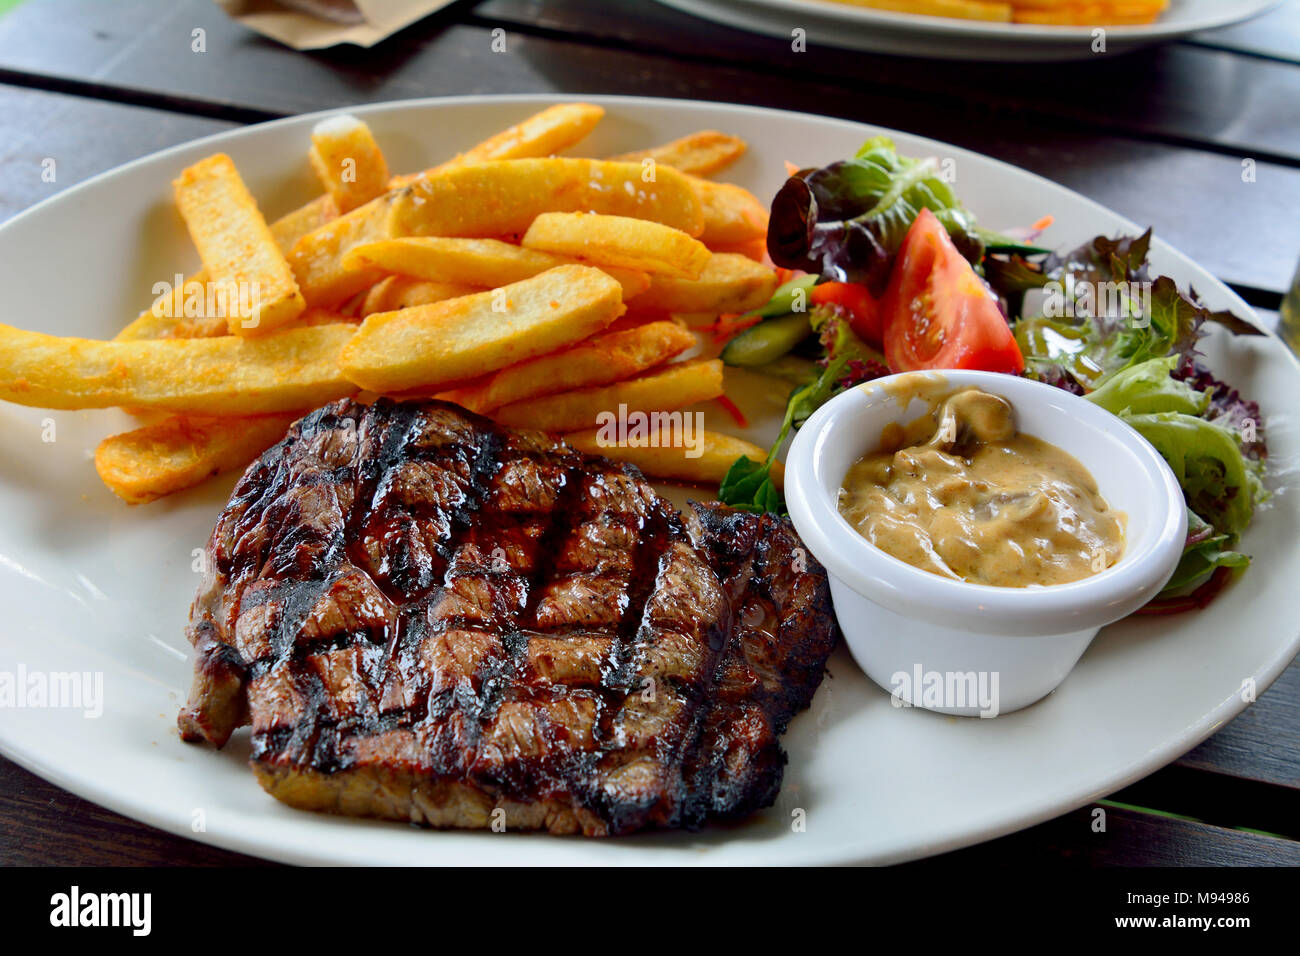 Plate of beef steak with salad, fried potatoes and mushroom sauce Stock  Photo - Alamy